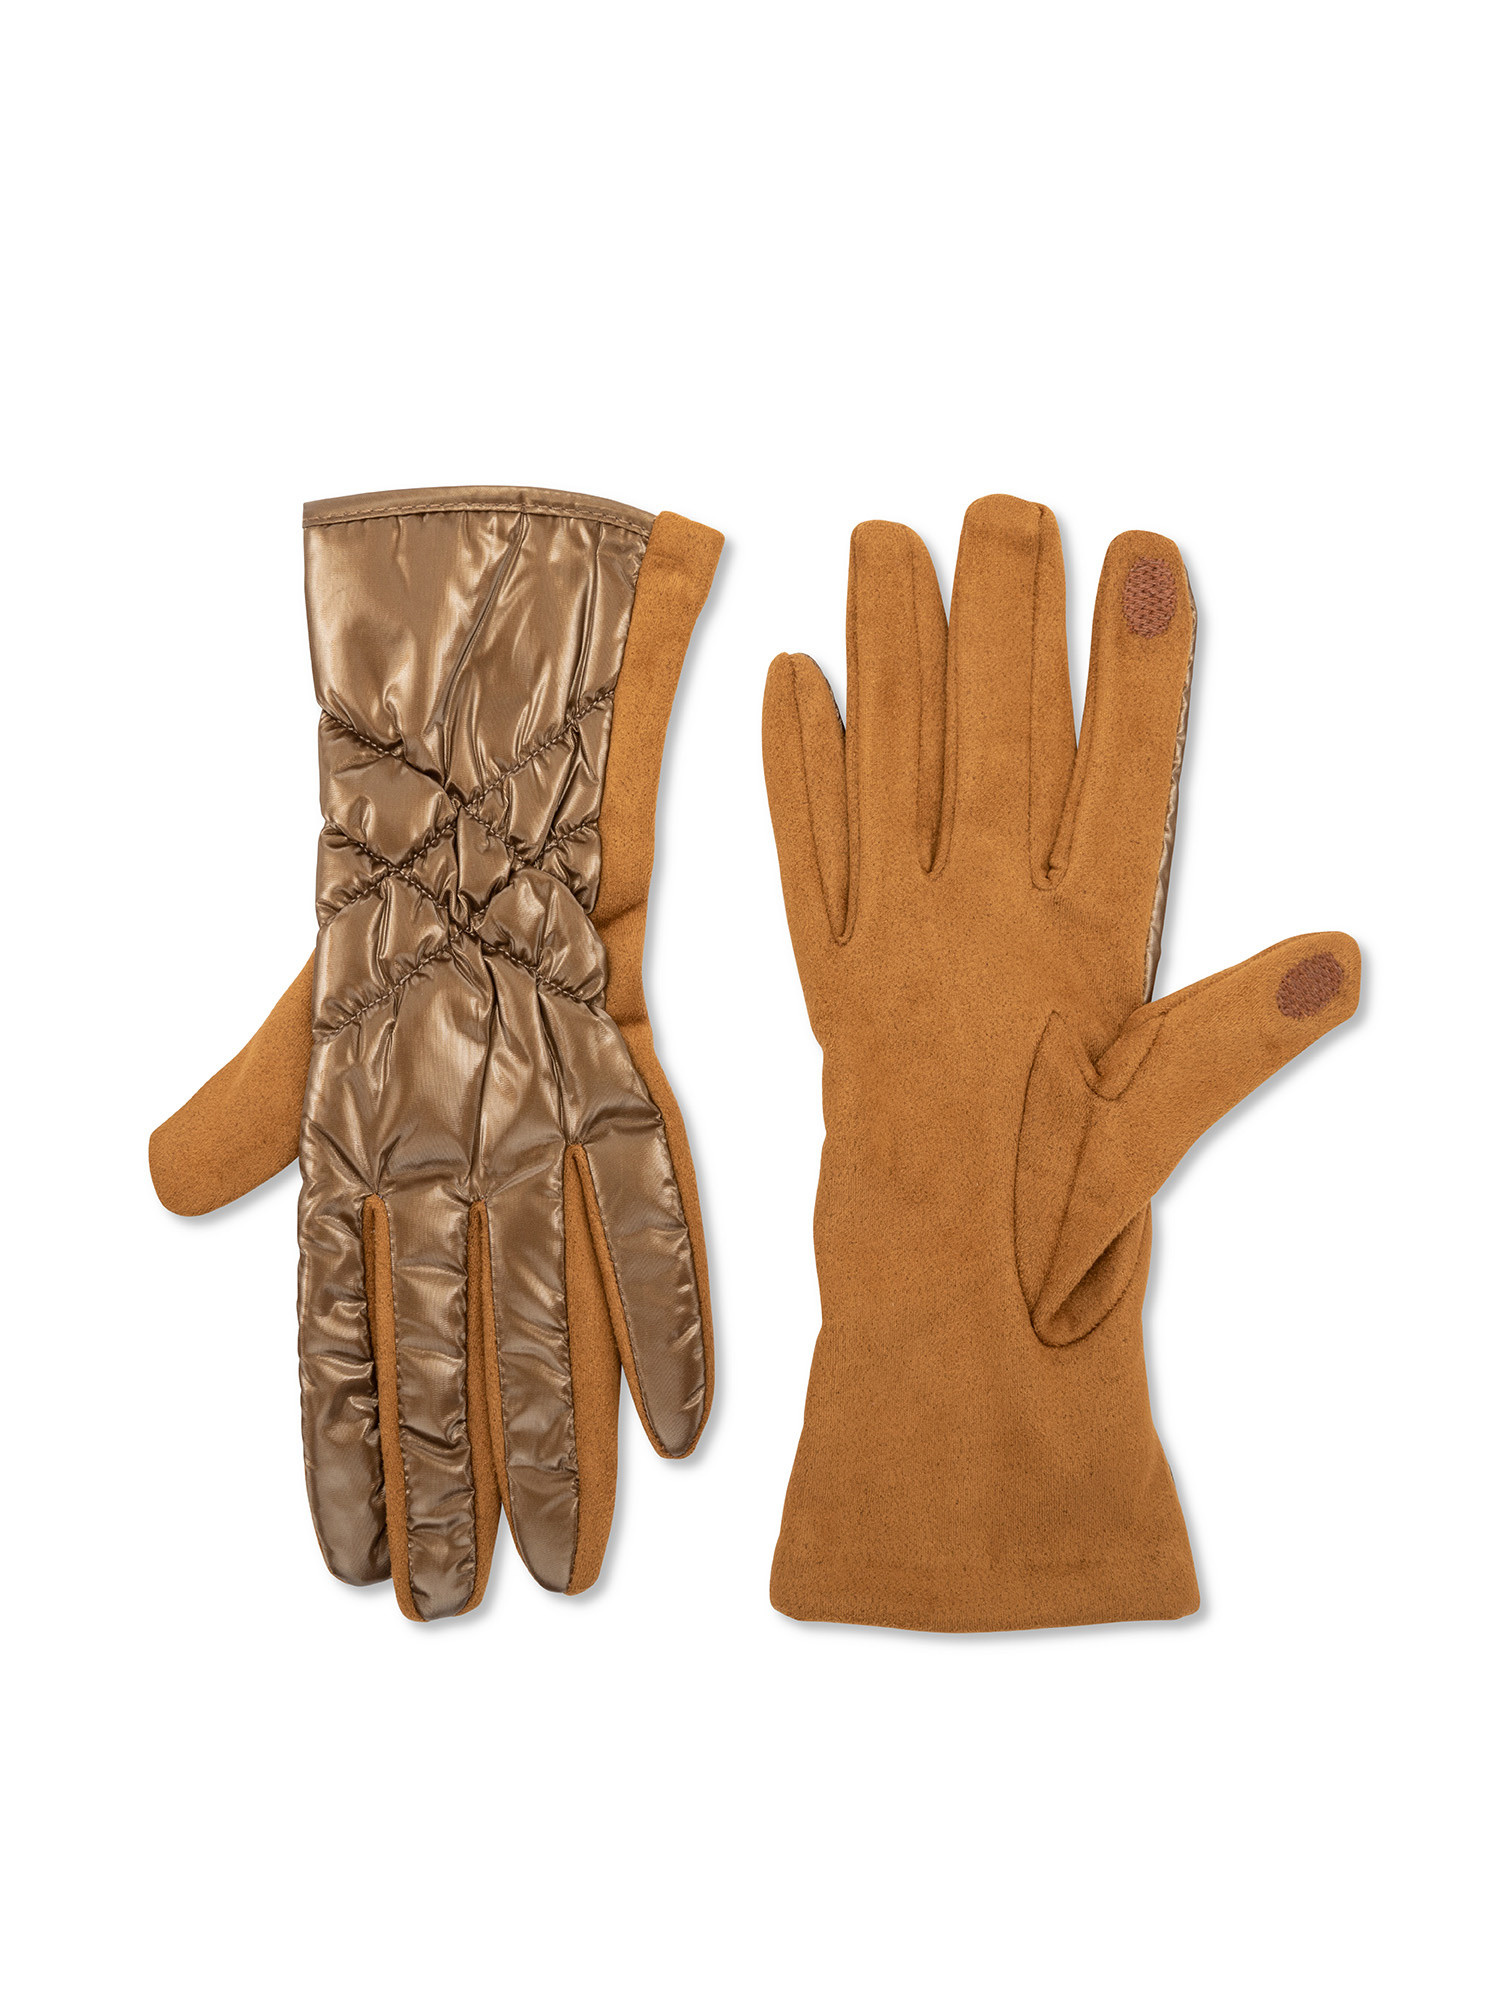 Koan - Quilted gloves, Brown, large image number 0